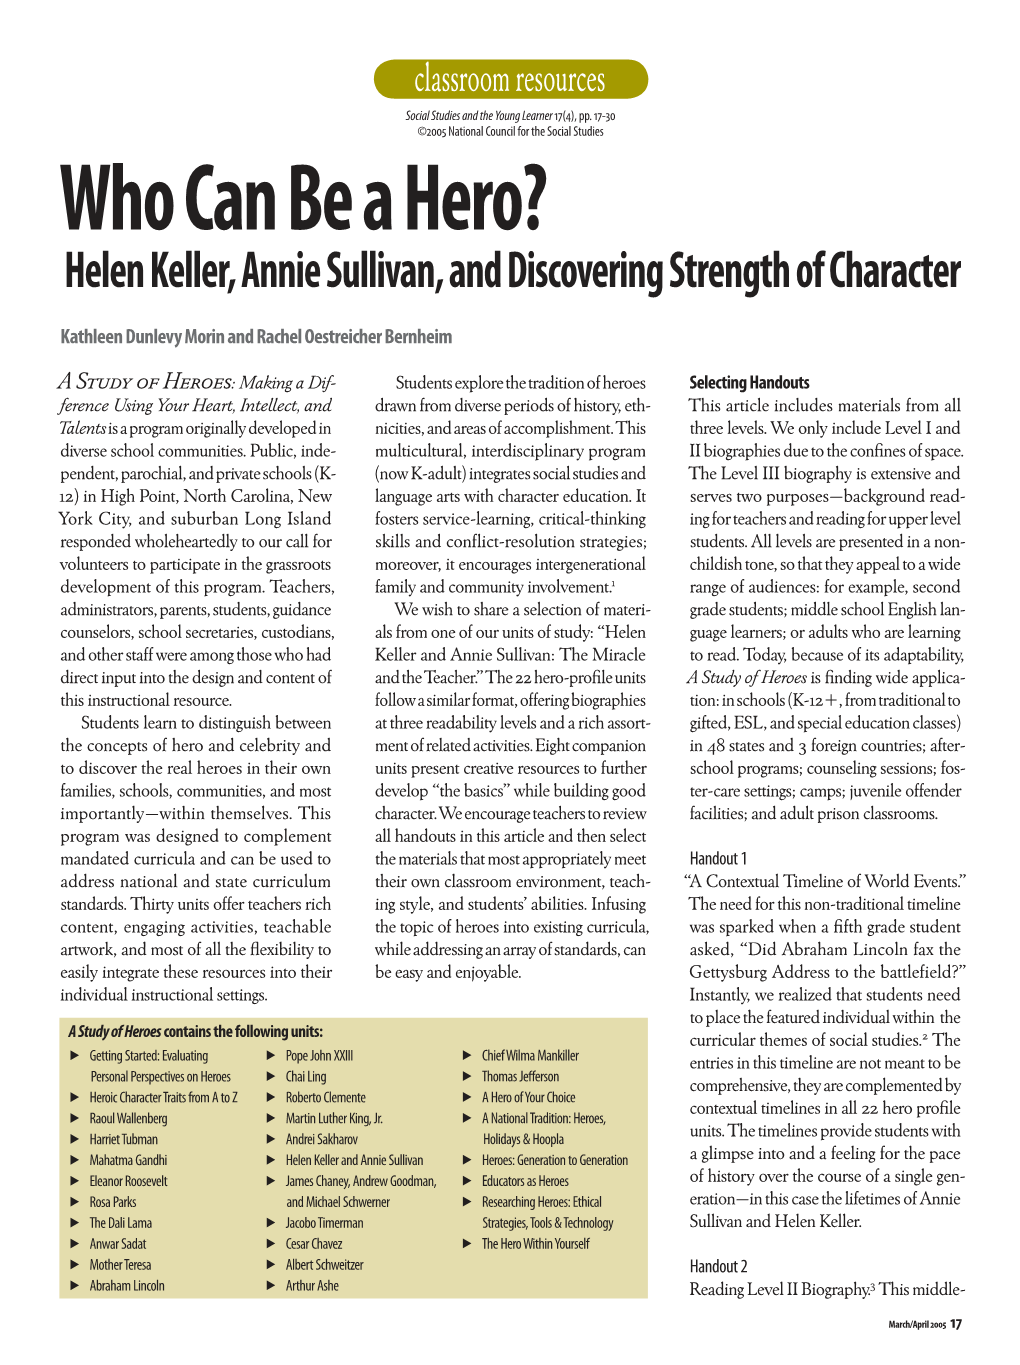 Who Can Be a Hero? Helen Keller, Annie Sullivan, and Discovering Strength of Character